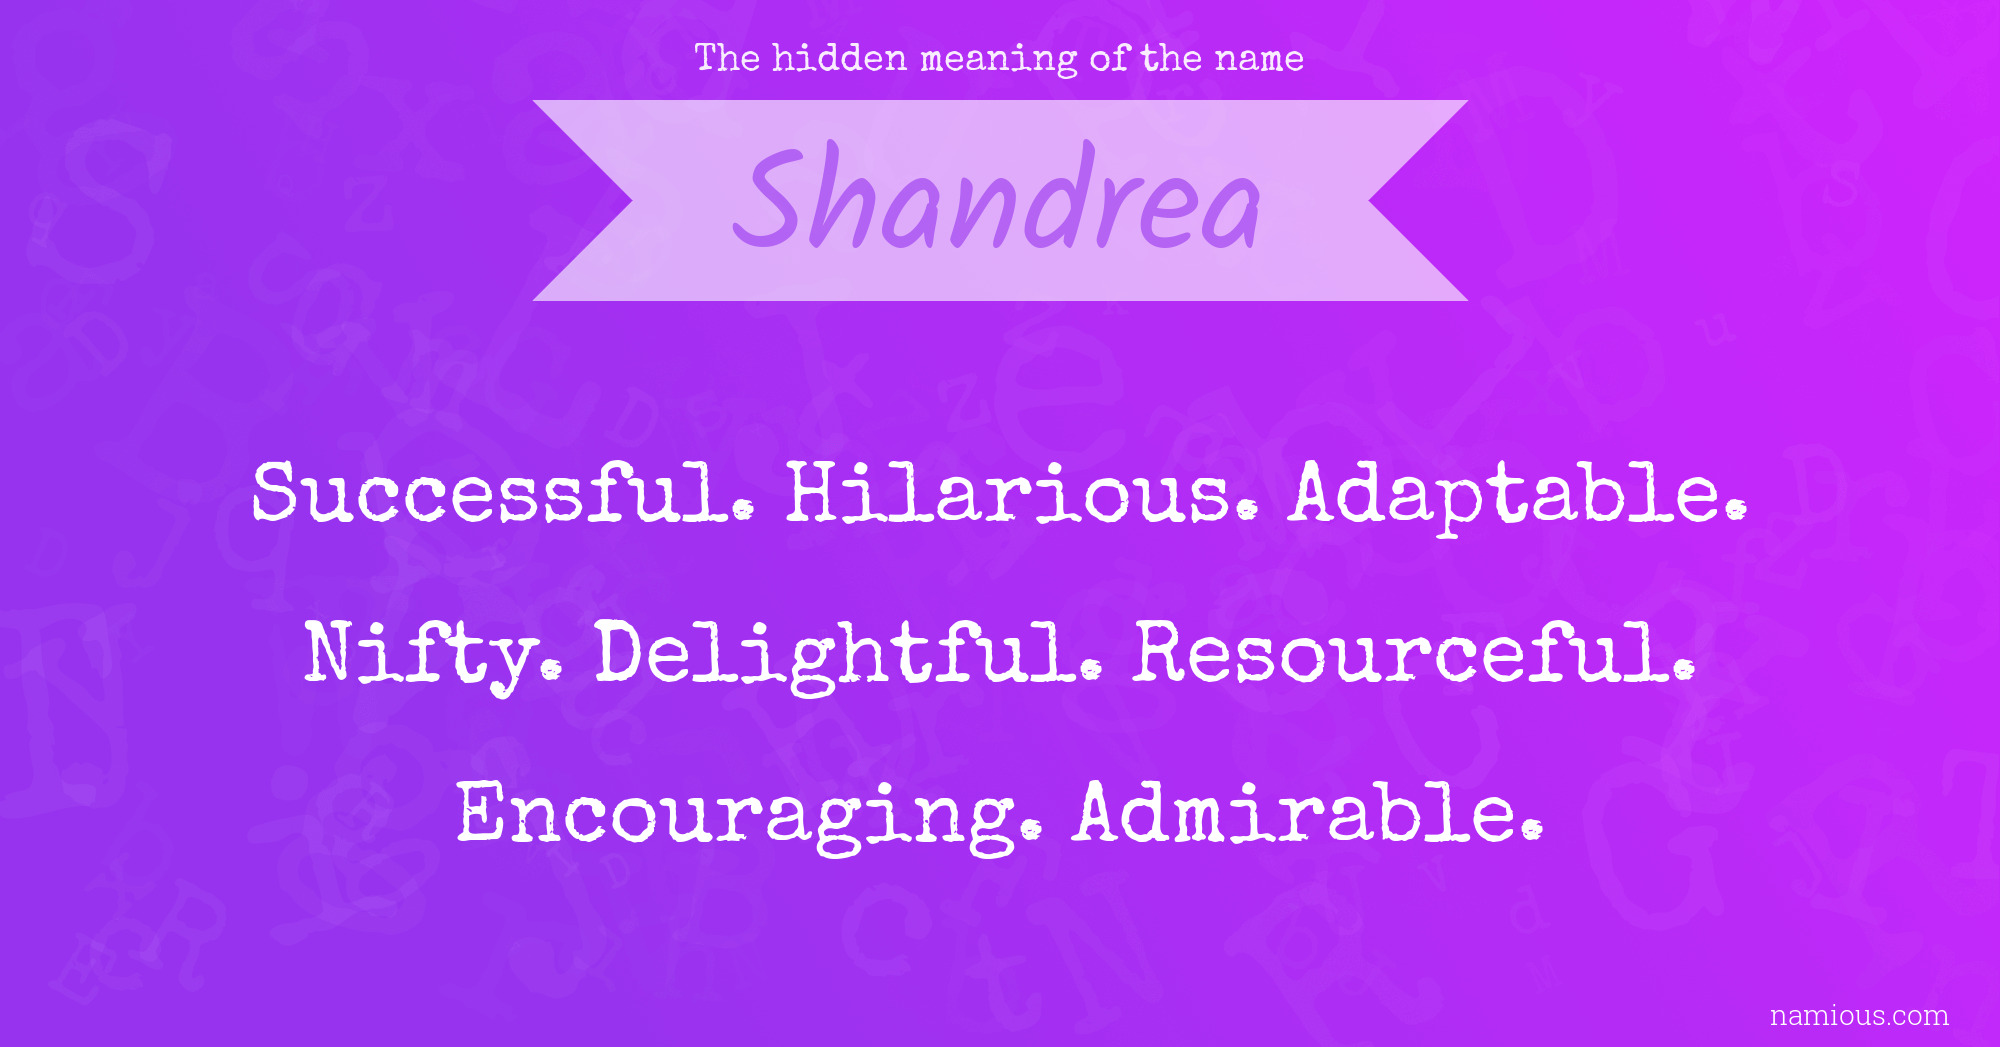 The hidden meaning of the name Shandrea